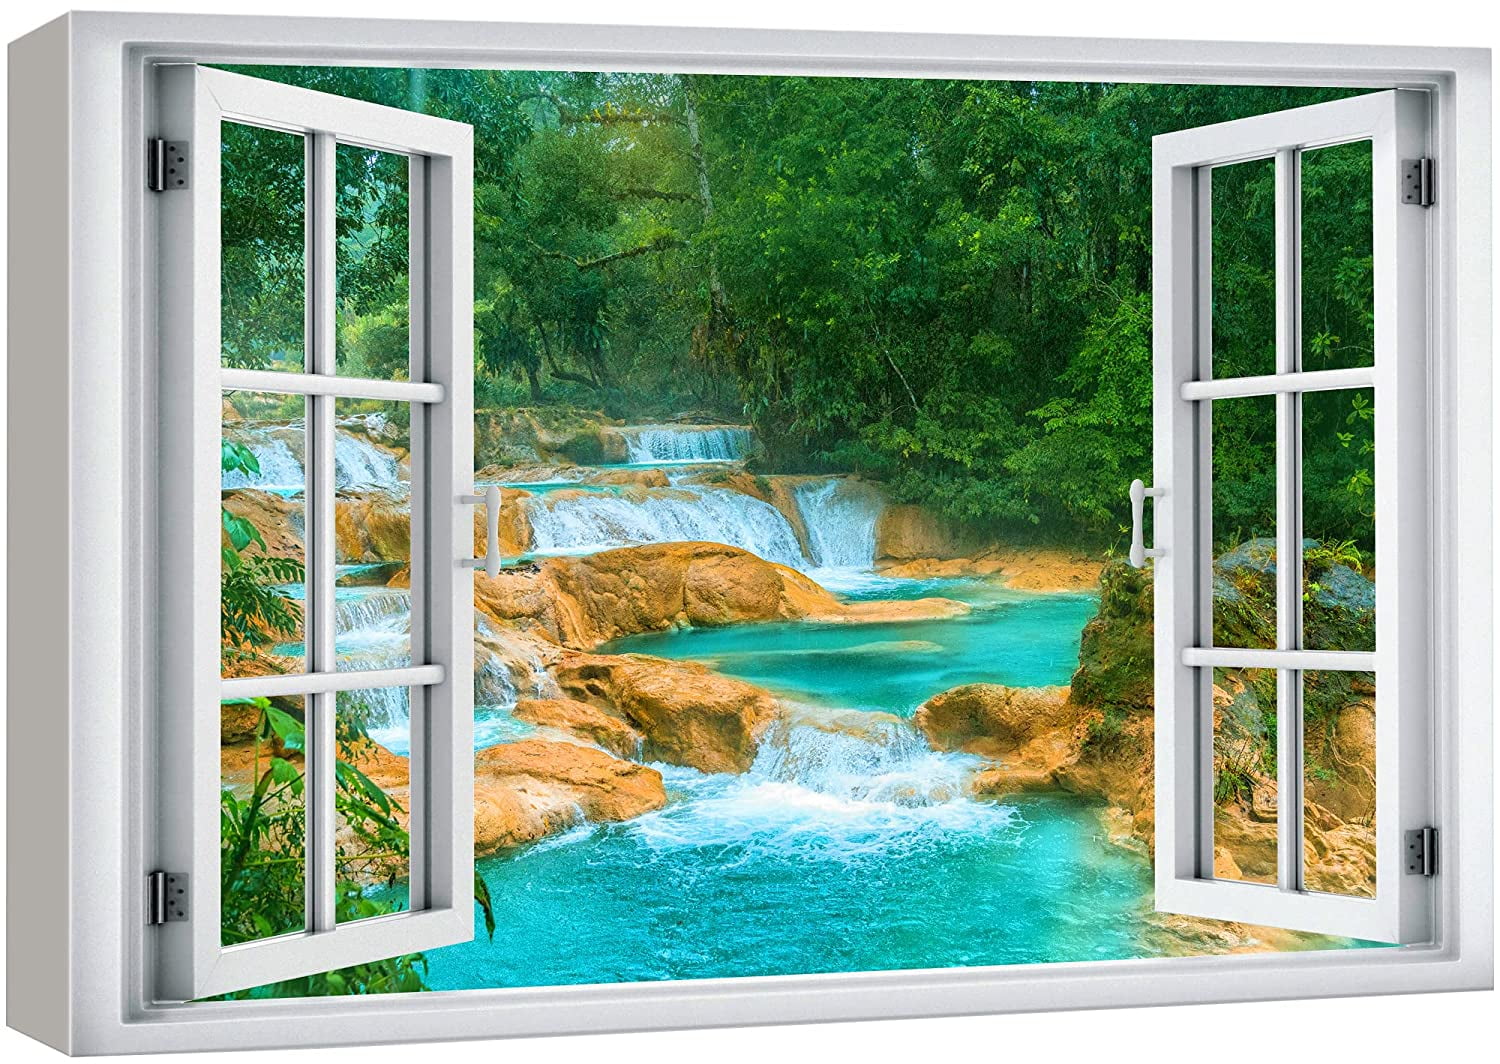 wall26 Canvas Print Wall Art Window View Neon Teal River Rapid Forest Lake  Stream Wilderness Nature Photography Realism Scenic Landscape Colorful  Multicolor for Living Room, Bedroom, Office 12quot